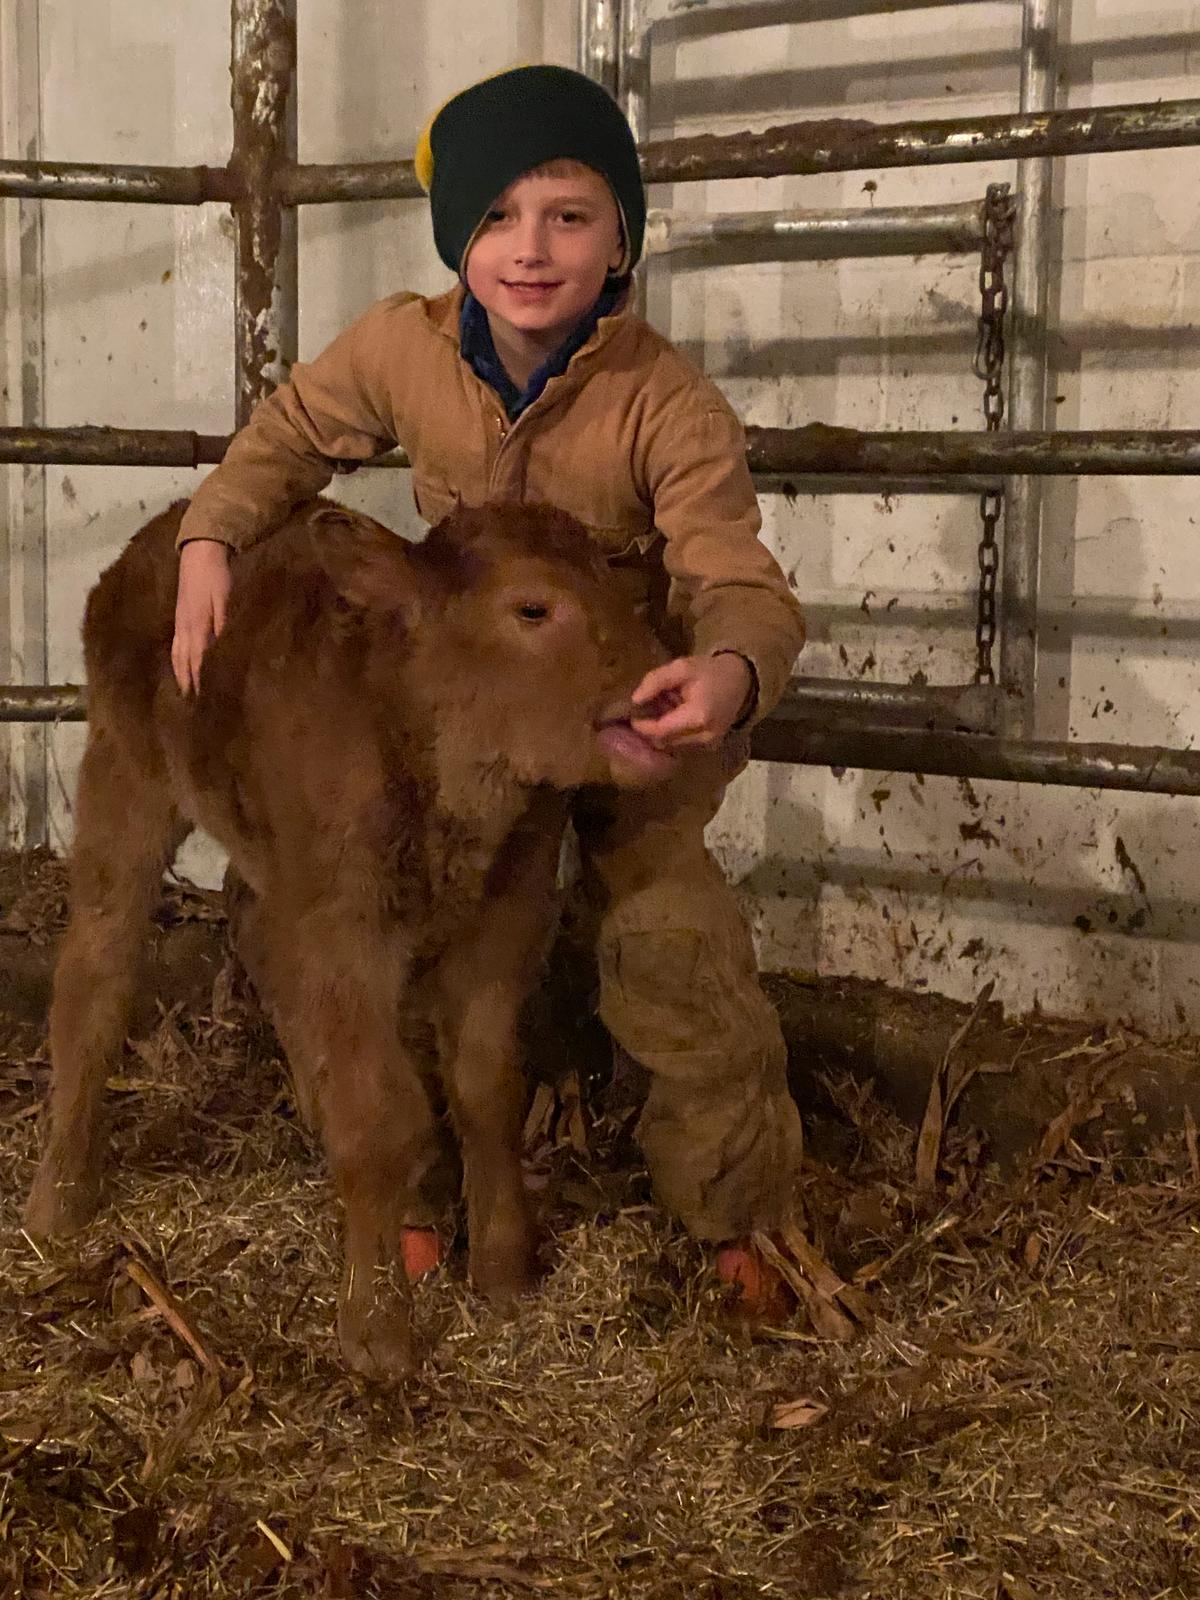 Caleb at 6 years old helping with his newborn beef calf, “Strawberry.” (Courtesy of Jill Bergner)